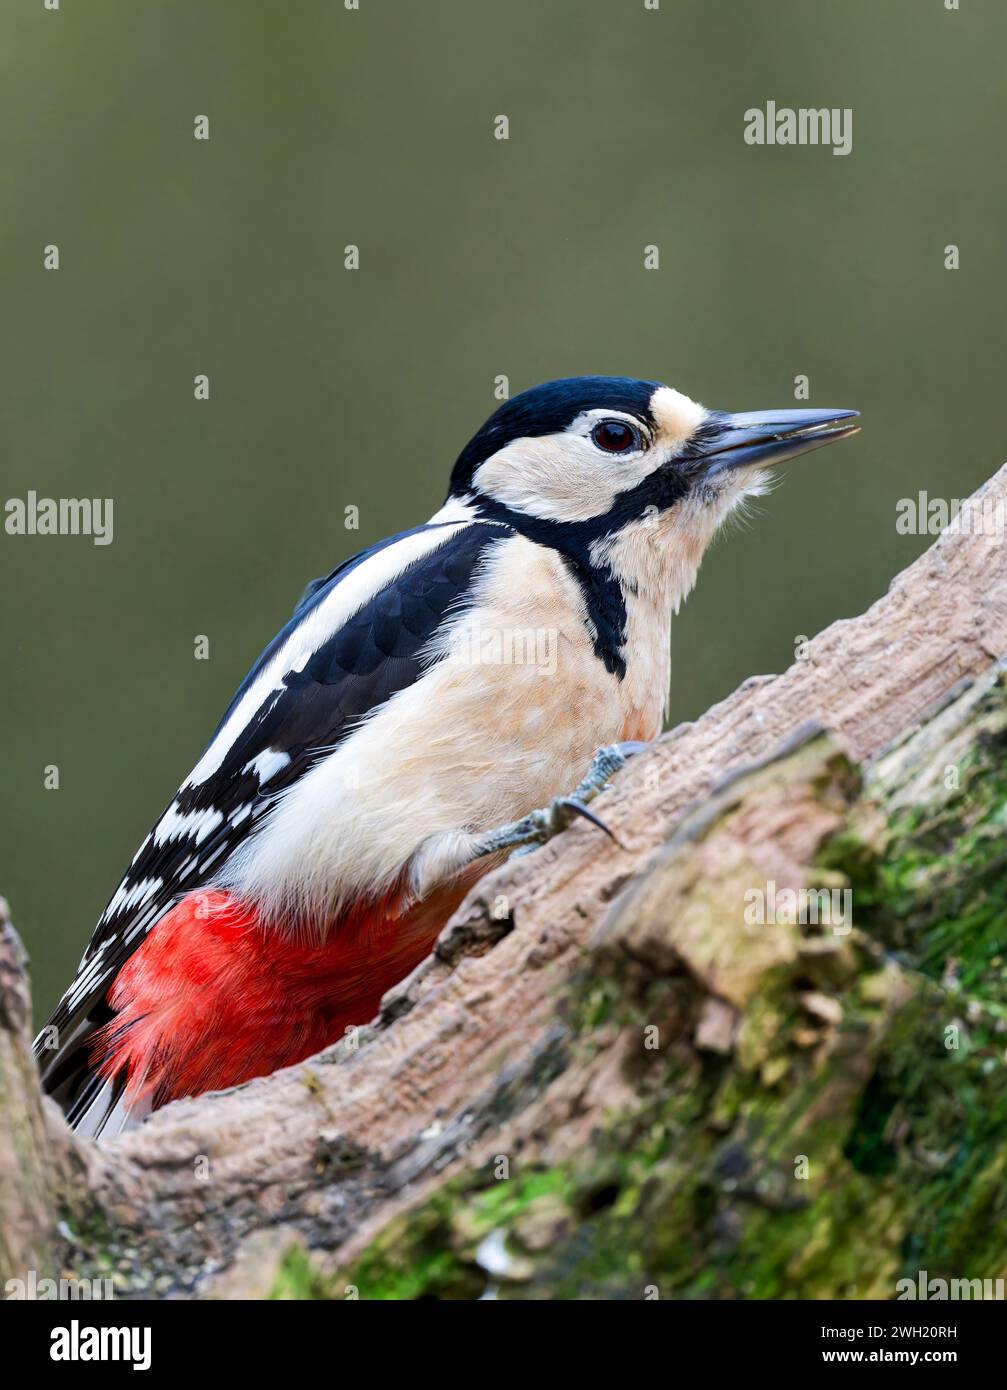 A spectacular male Great Spotted Woodpecker, (Dendrocopos major), clinging to the side of a tree trunk Stock Photo